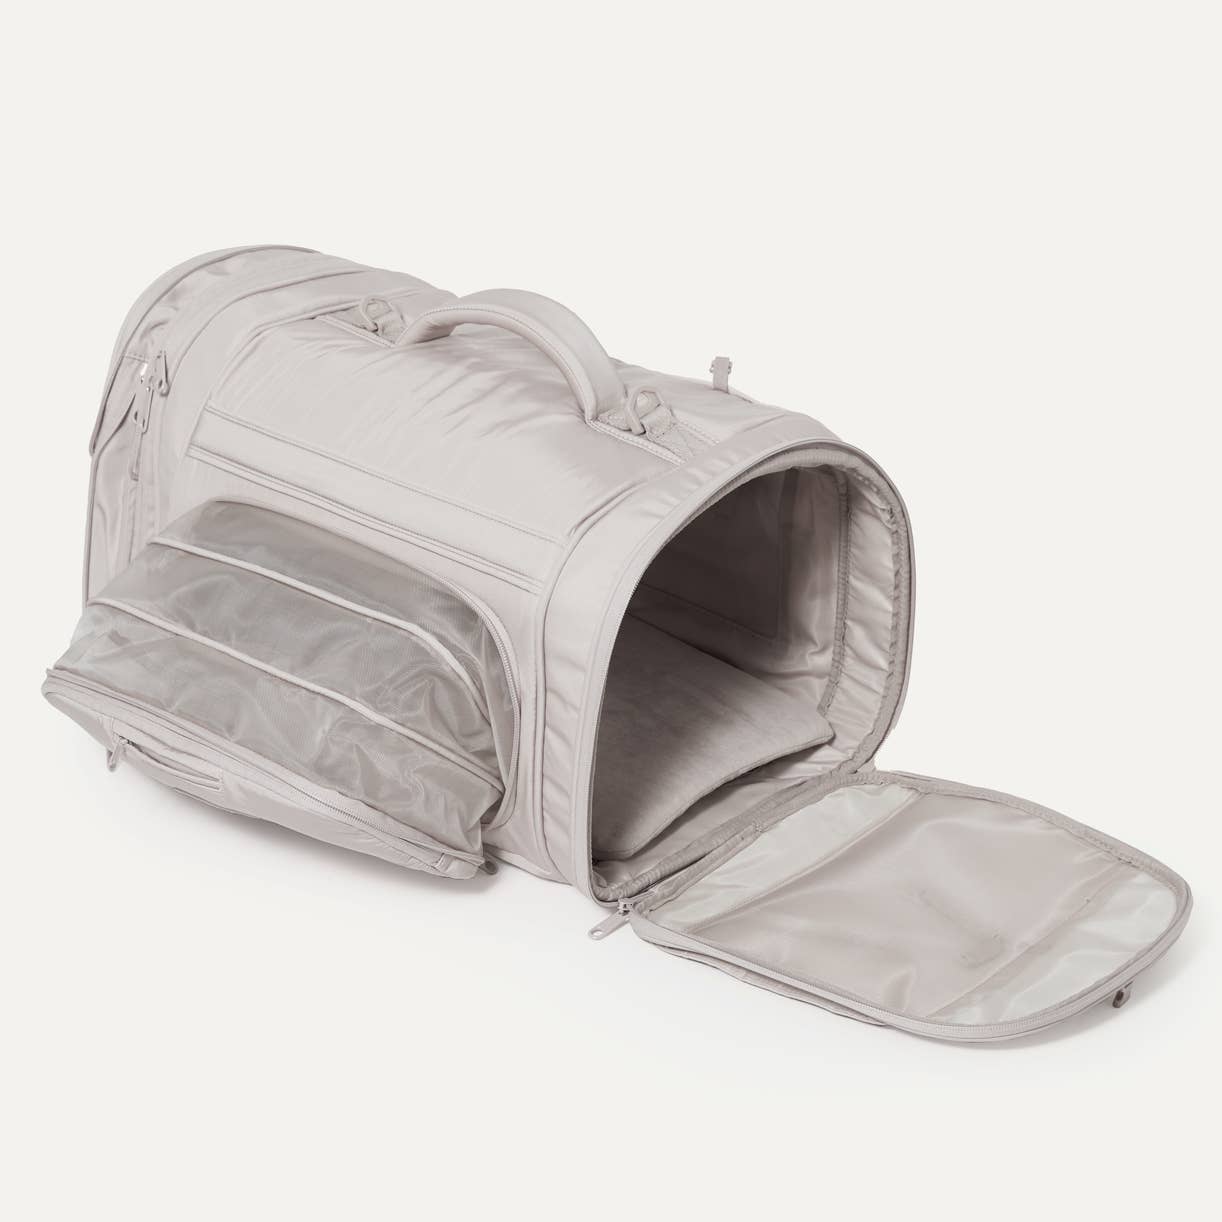 All in One Dog Travel Carrier